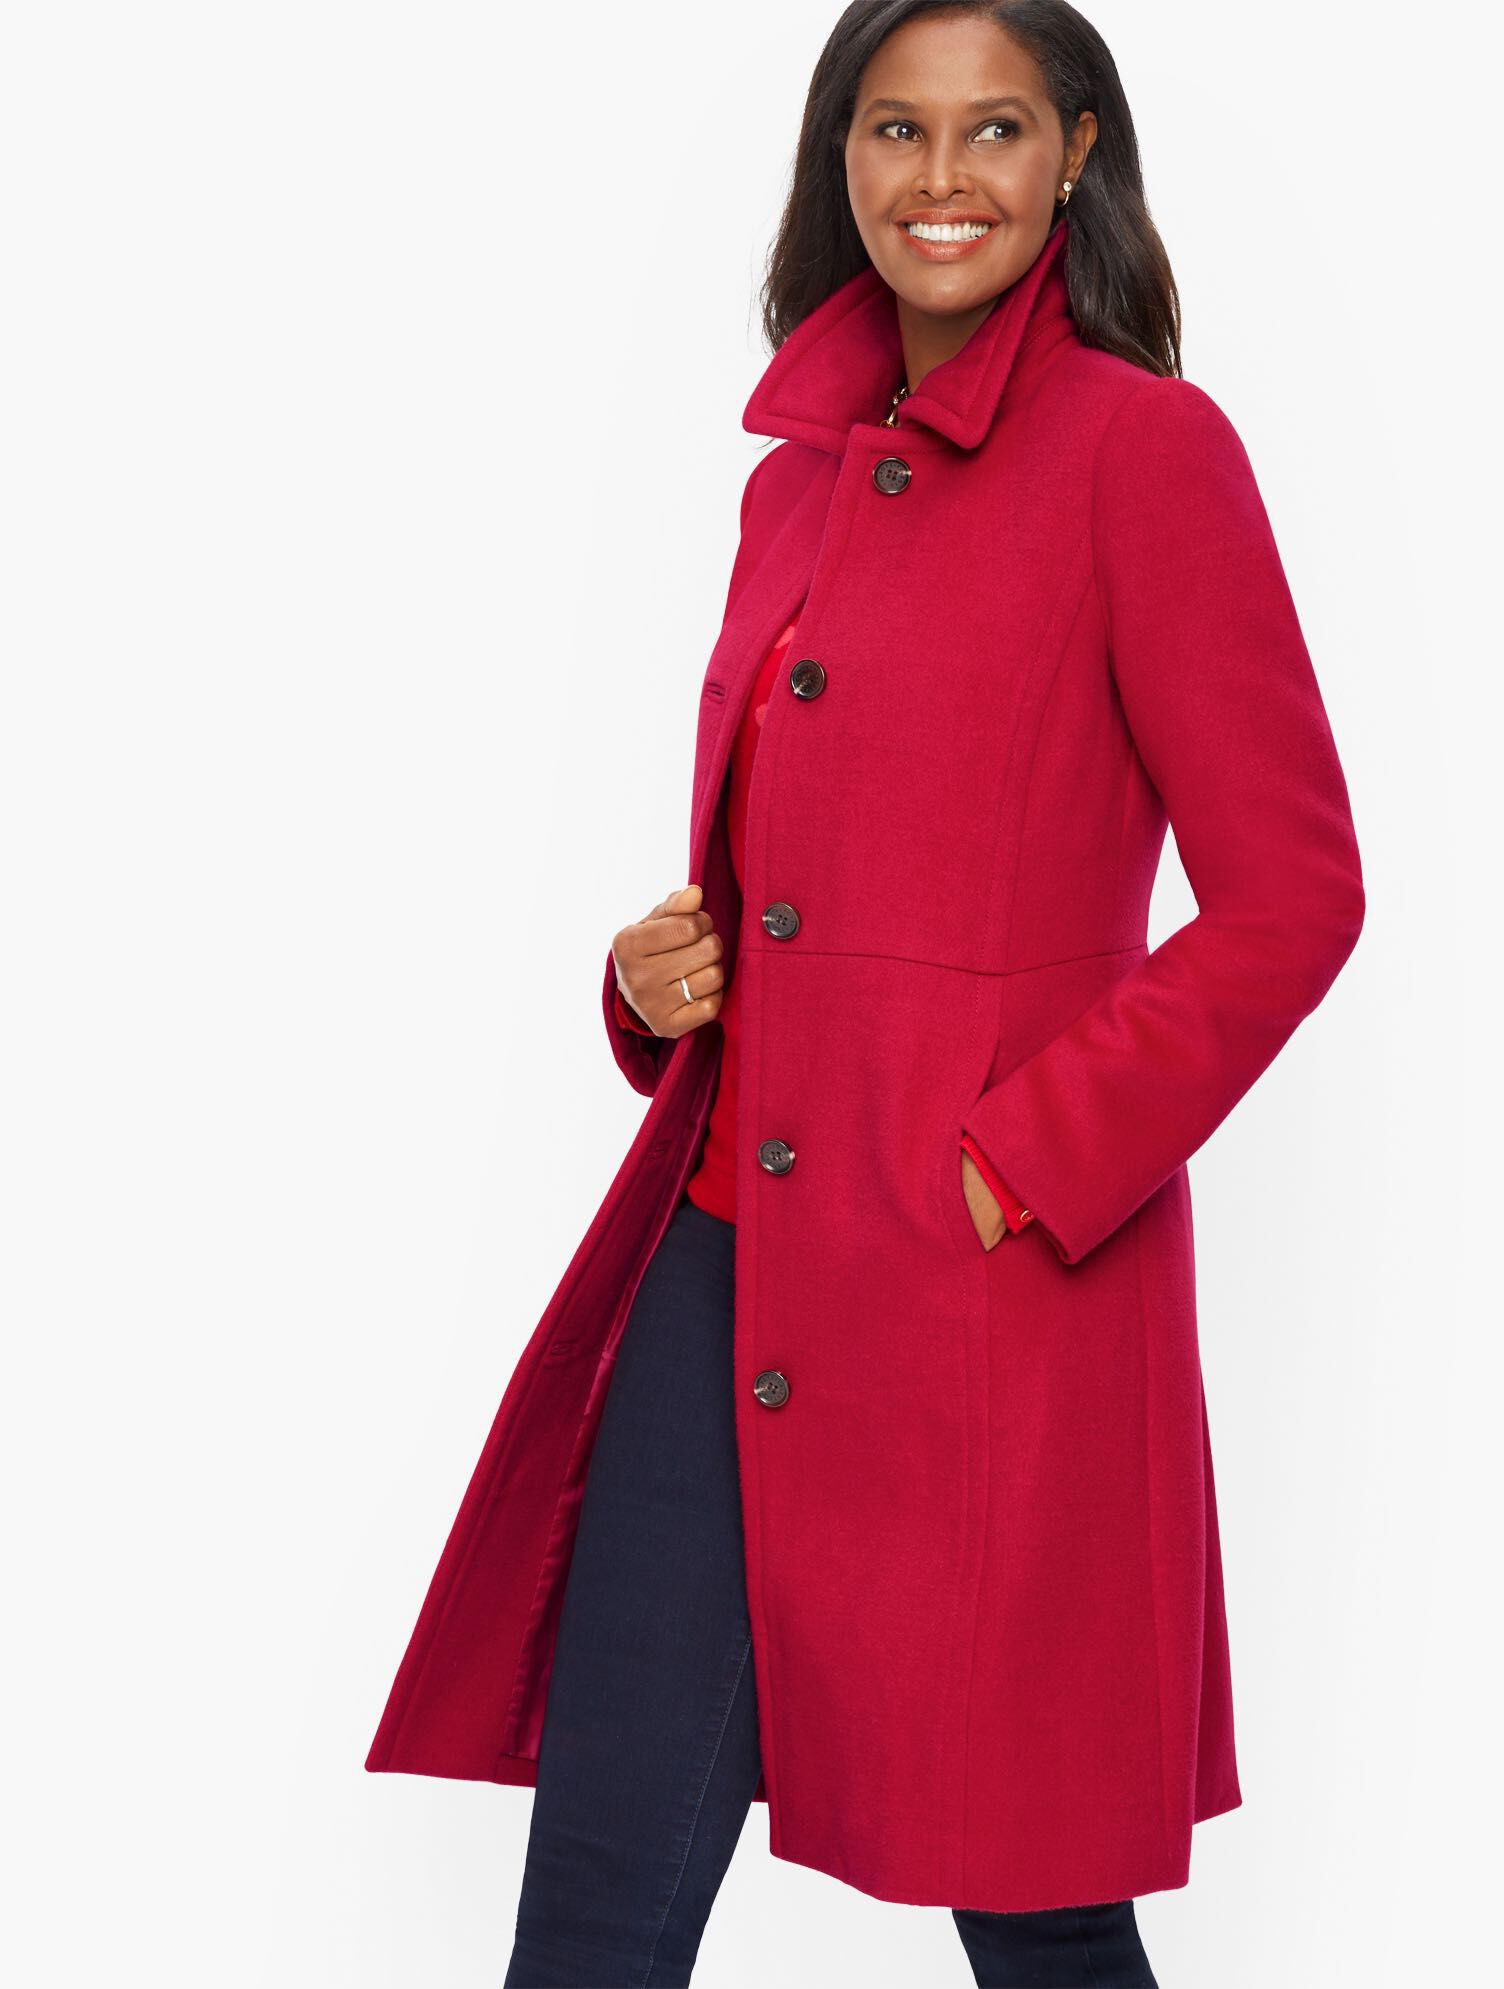 Jackets and Outerwear  Knit Twill Band Jacket RED POP - Talbots Womens •  Winners Chapel